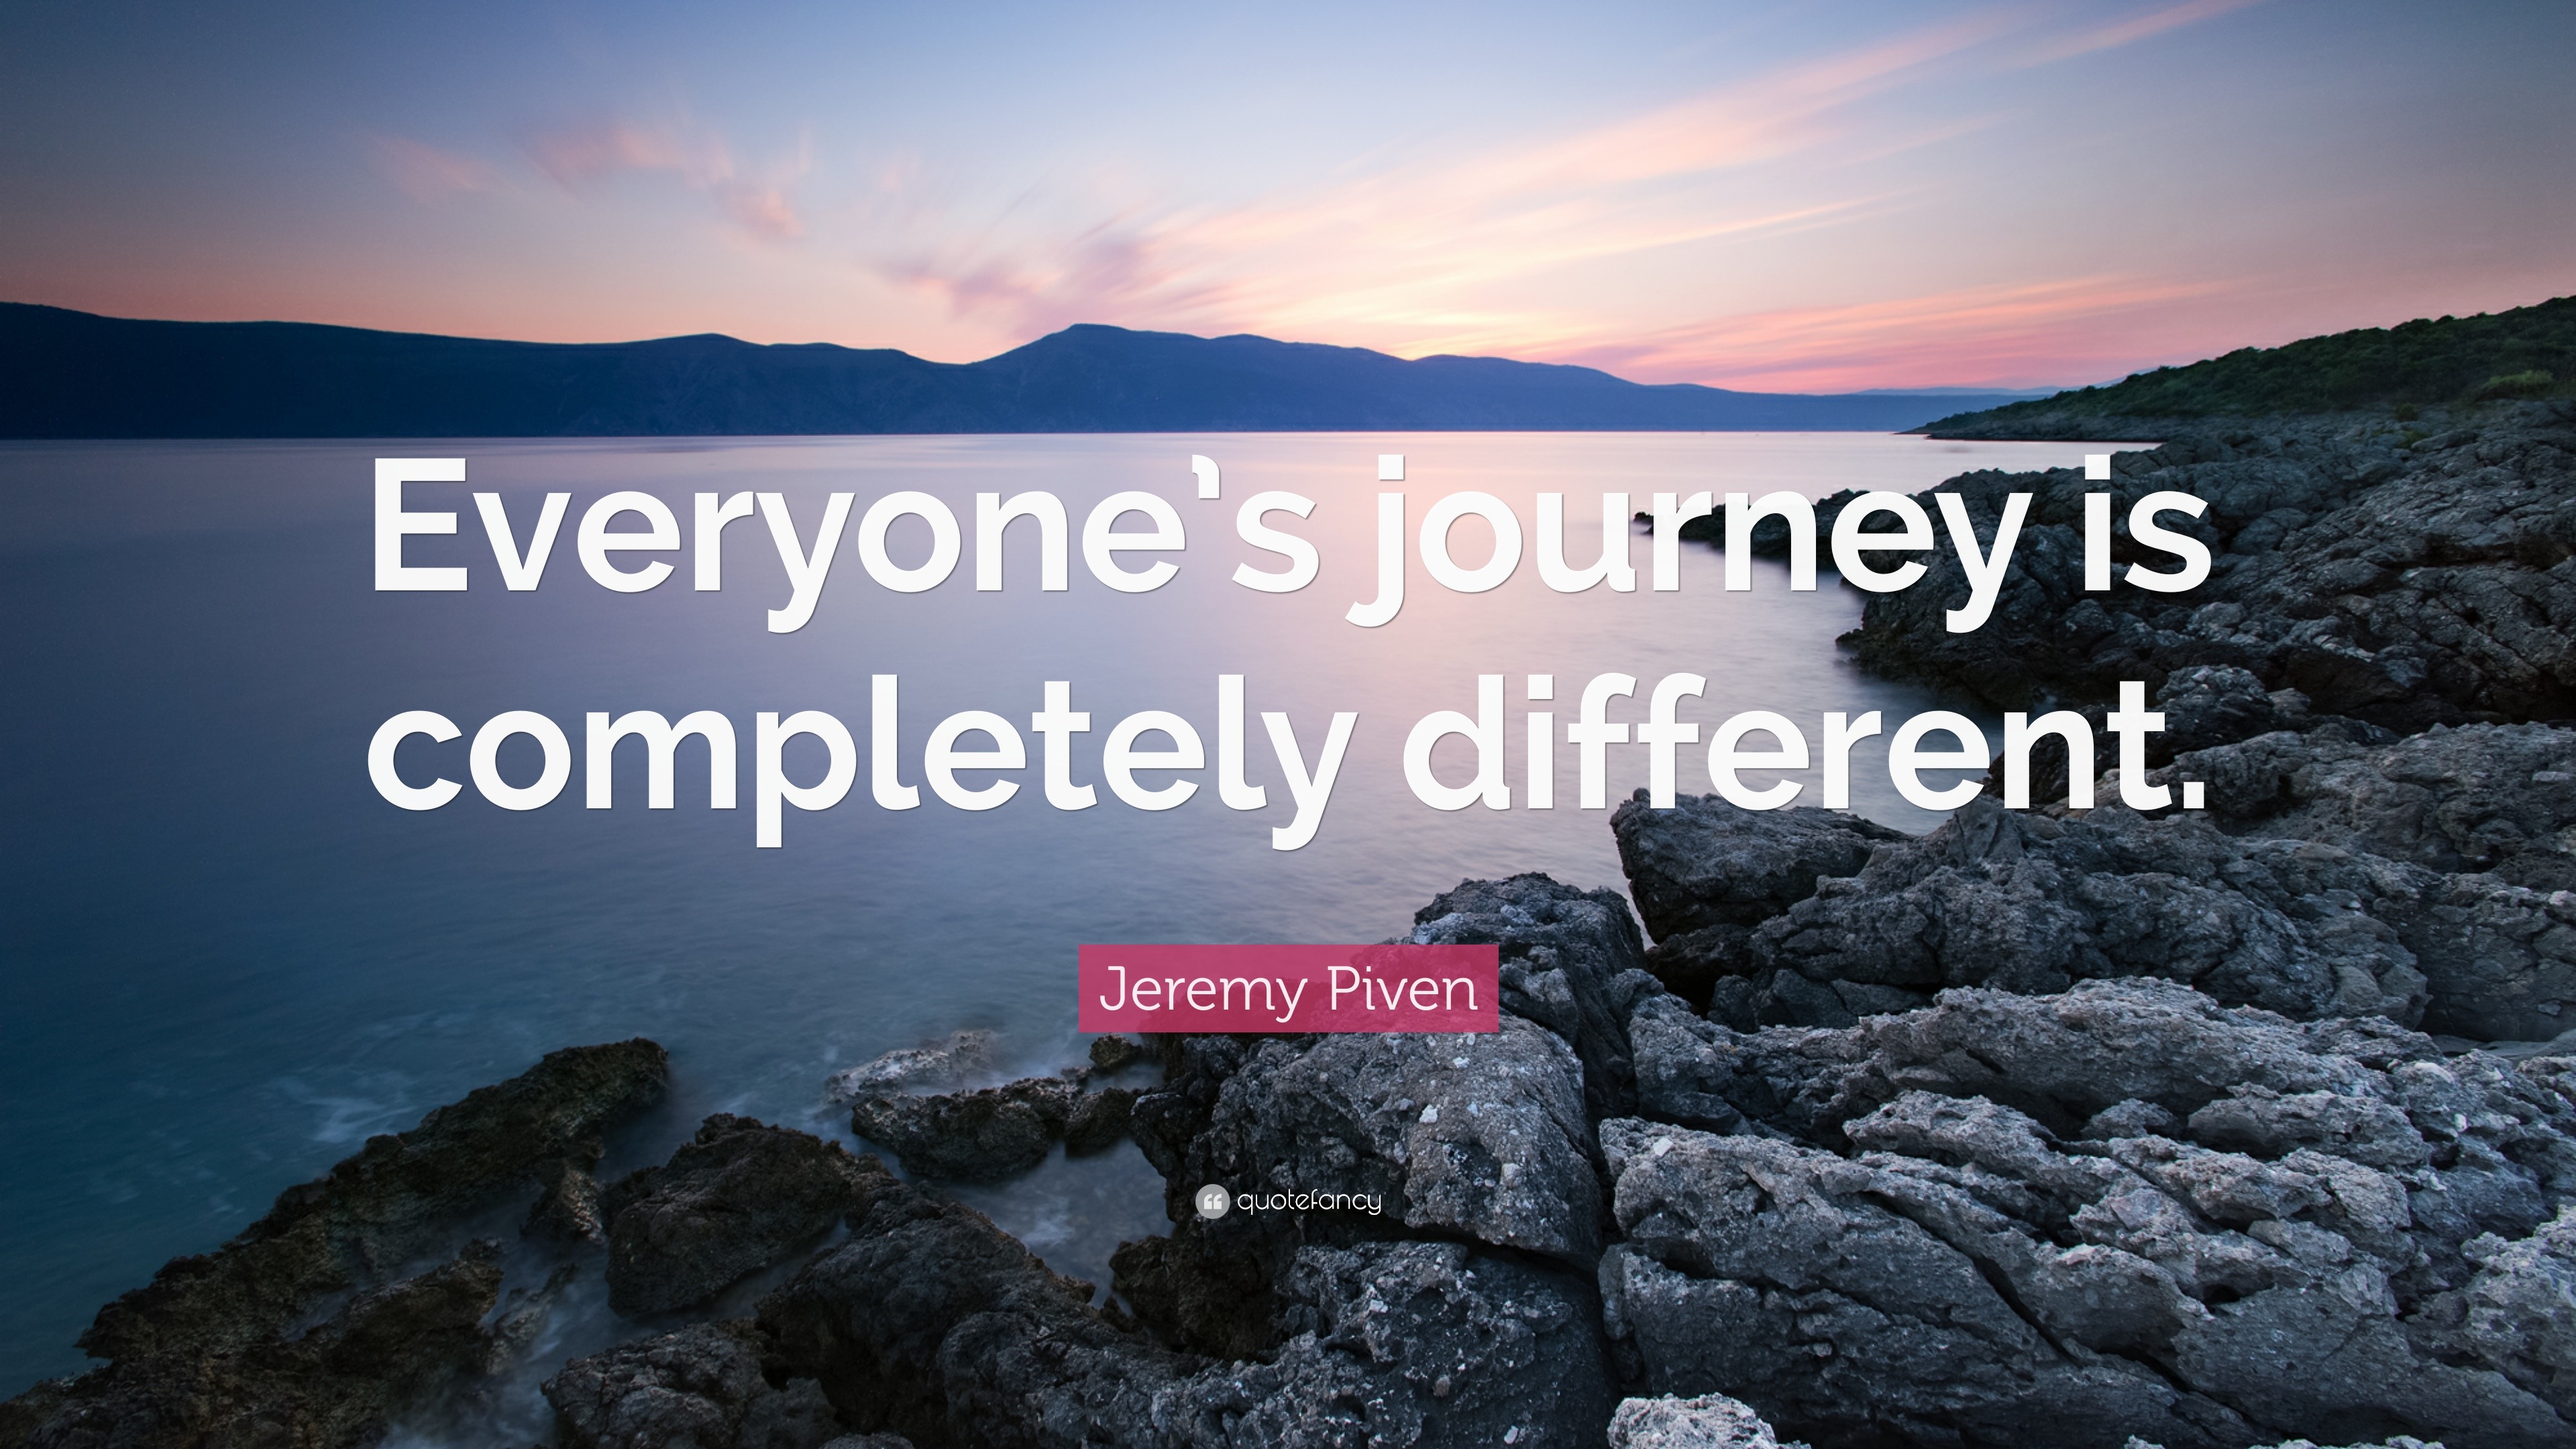 everyone has different journey